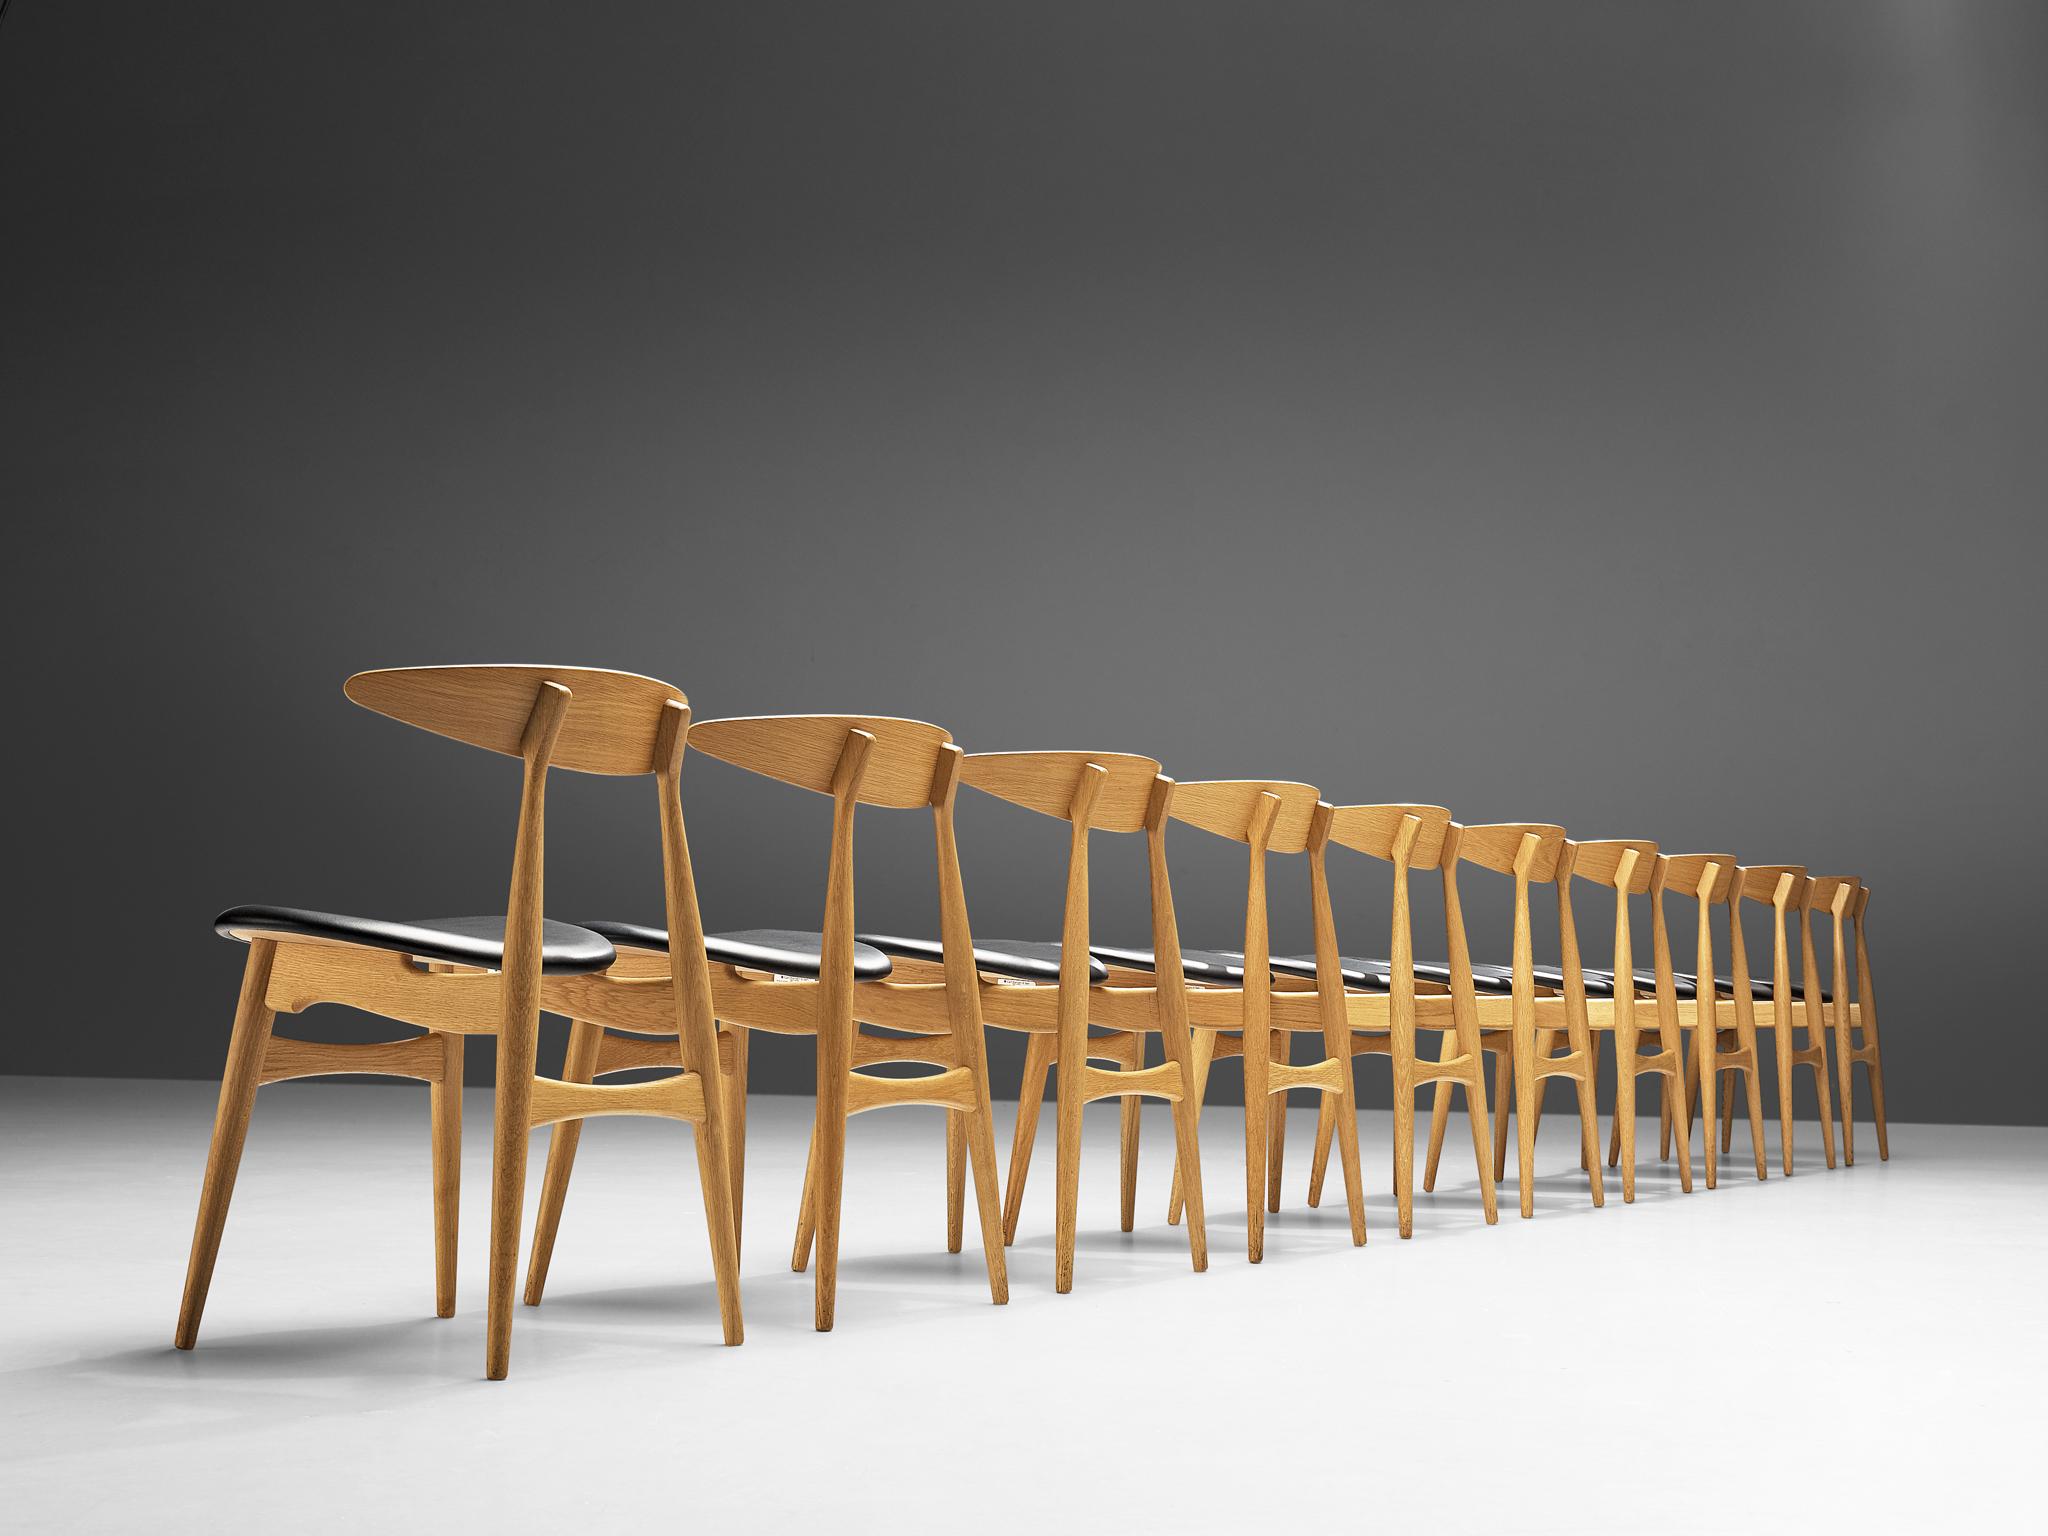 Mid-20th Century Hans J. Wegner for Carl Hansen & Søn Set of Ten Dining Chairs in Oak and Leather